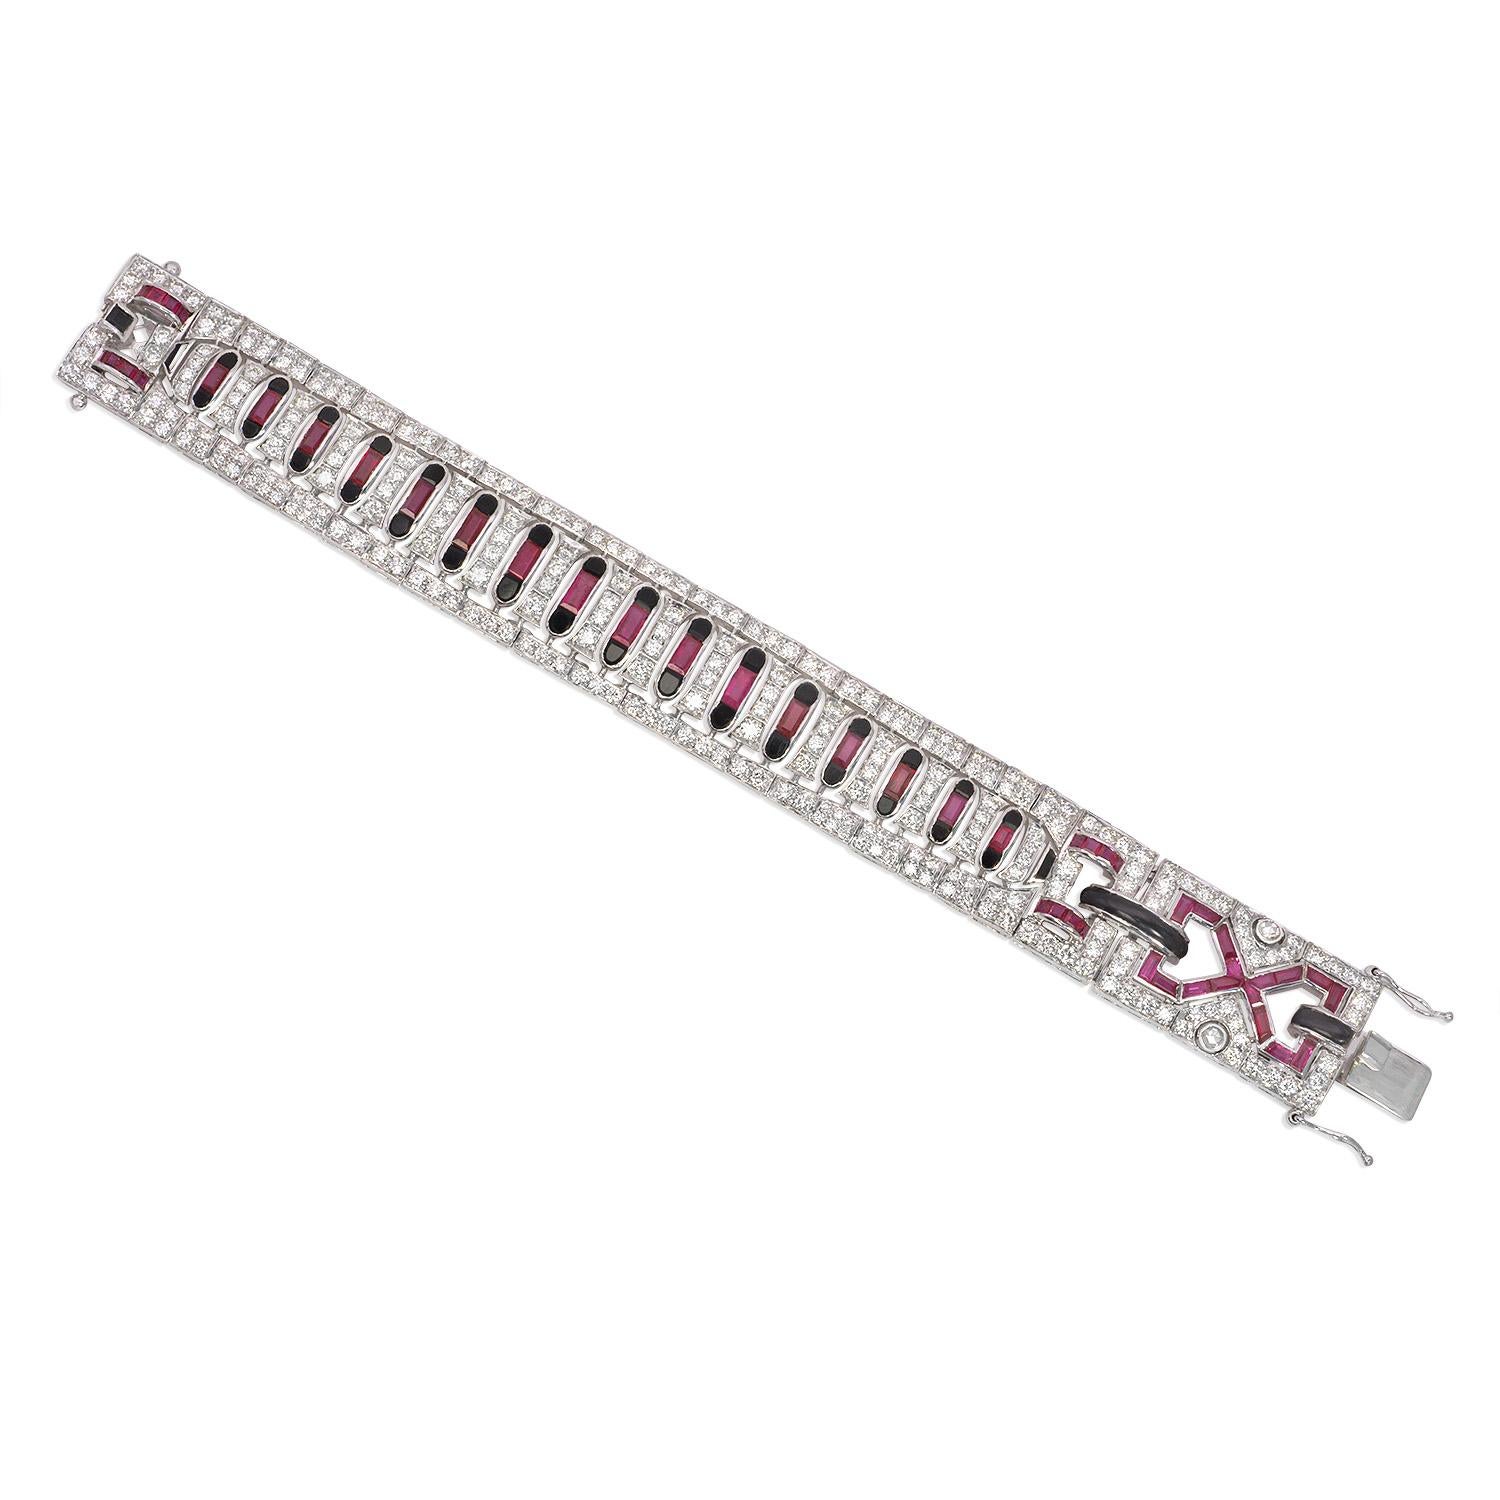 This exquisite bracelet exudes a luxurious and bold charm with its stunning art deco design. Crafted with 18K white gold, the bracelet is 6.5 mm wide and 173 mm long, making it the perfect accessory for any wrist. The accent of the bracelet are a